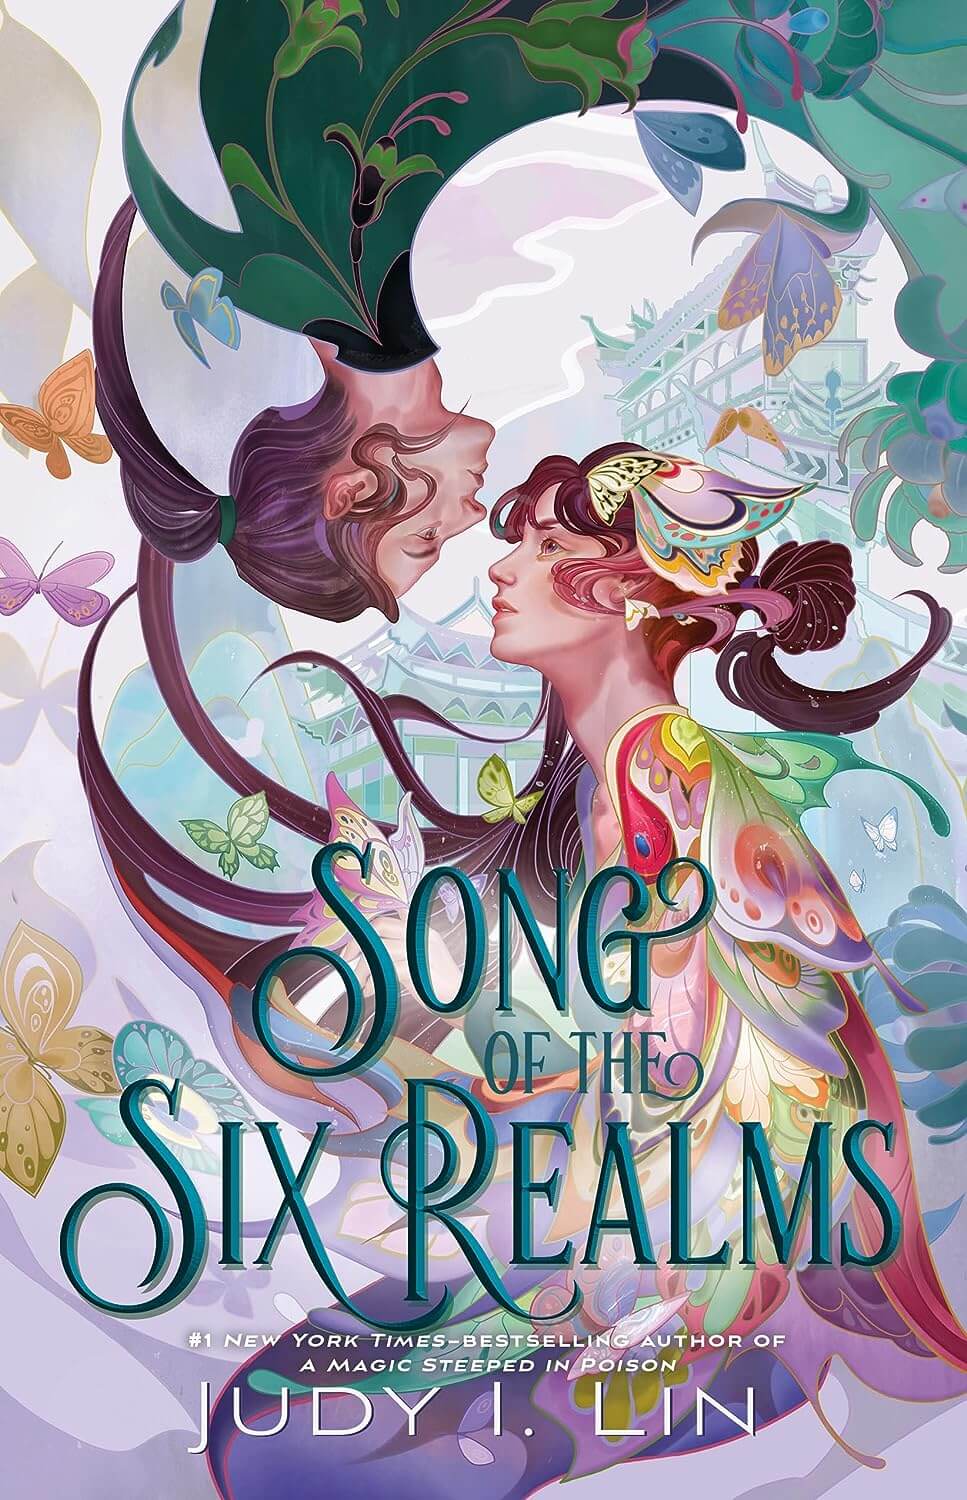 Song of Six Realms